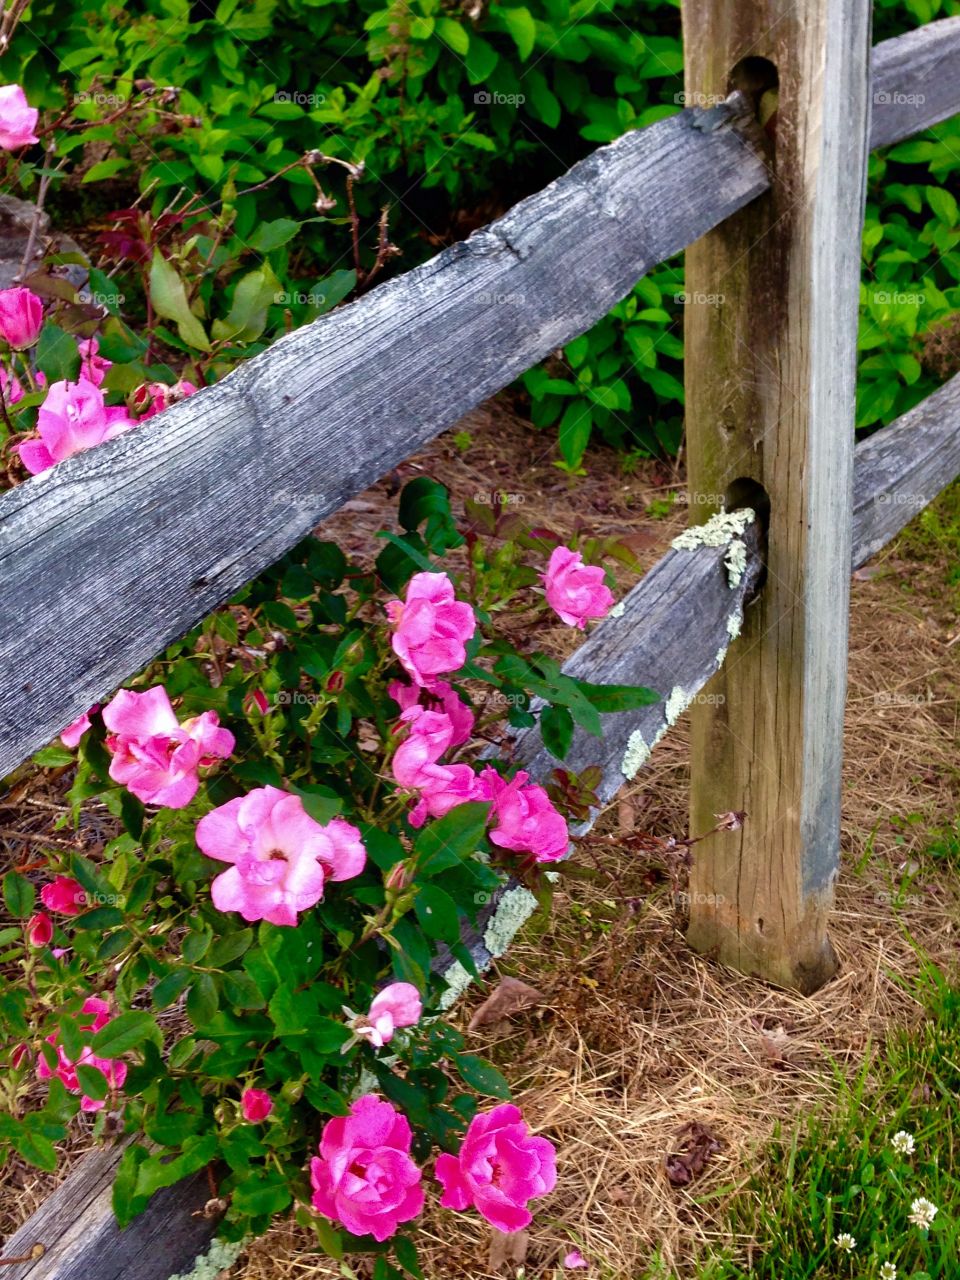 Rustic and Roses. Pink roses on a rustic fence